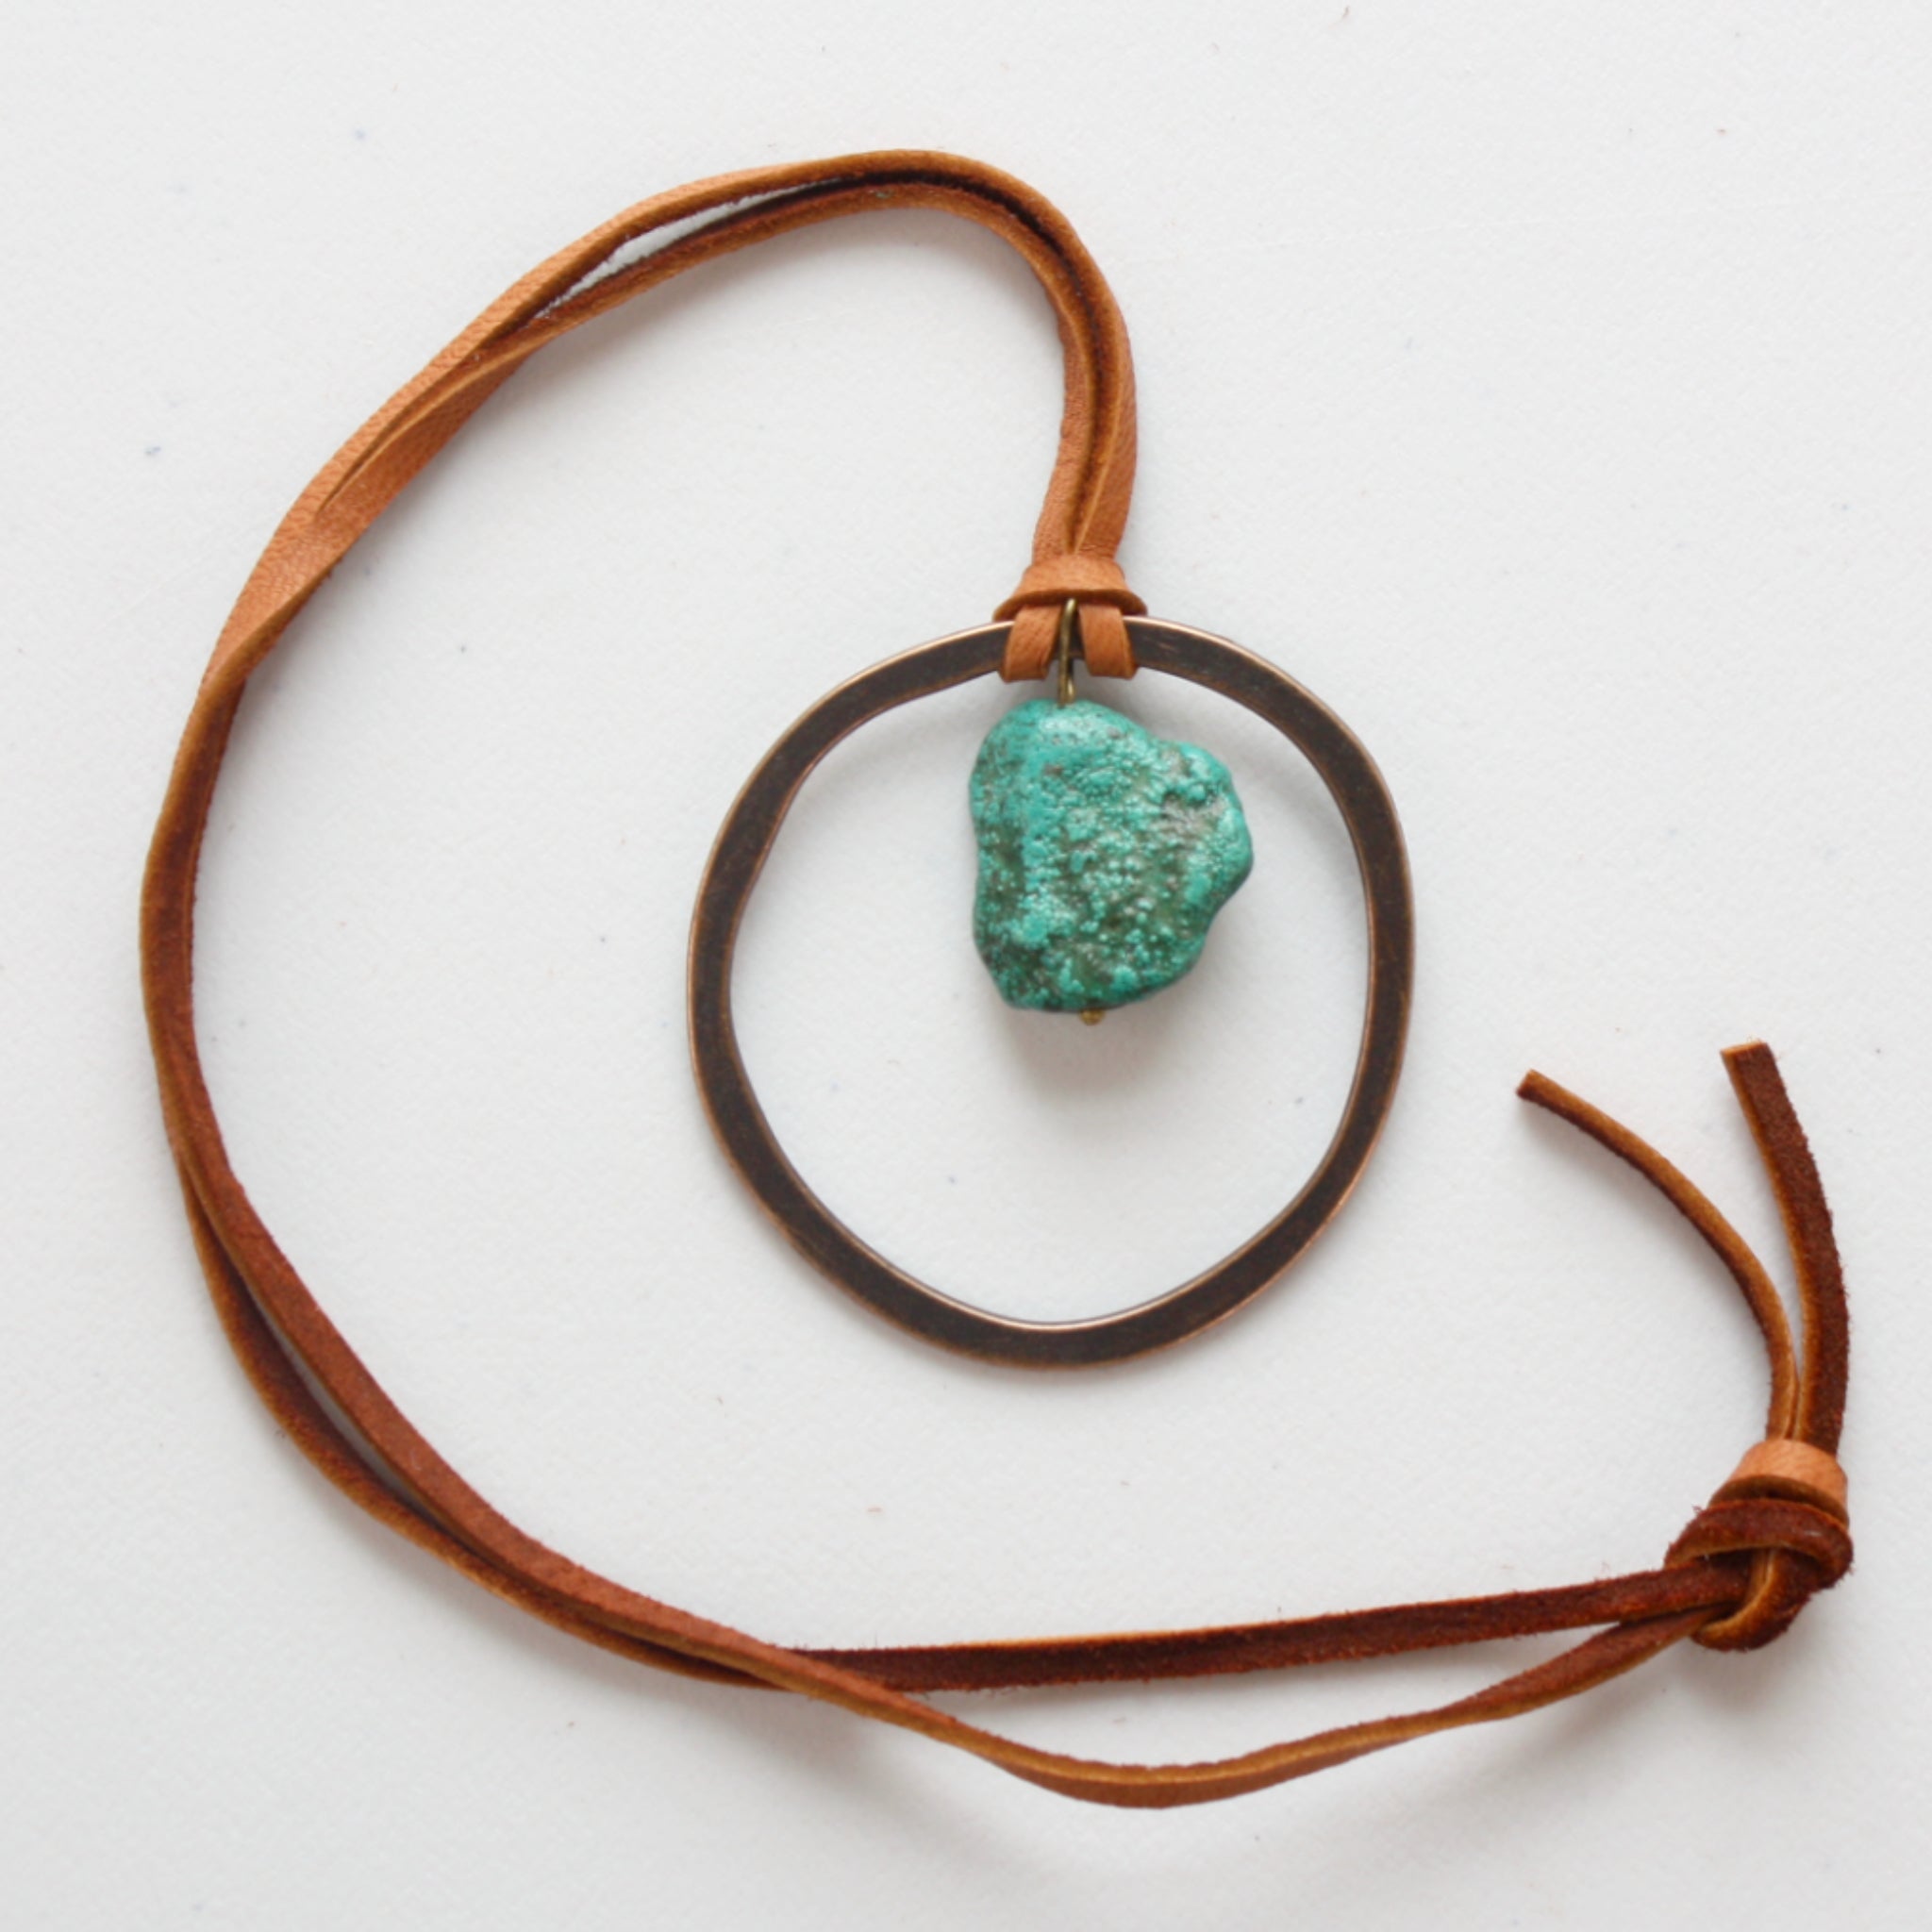 Leather Cord Necklace - Antique Gold/Turquoise - Handmade in the USA -  , LLC